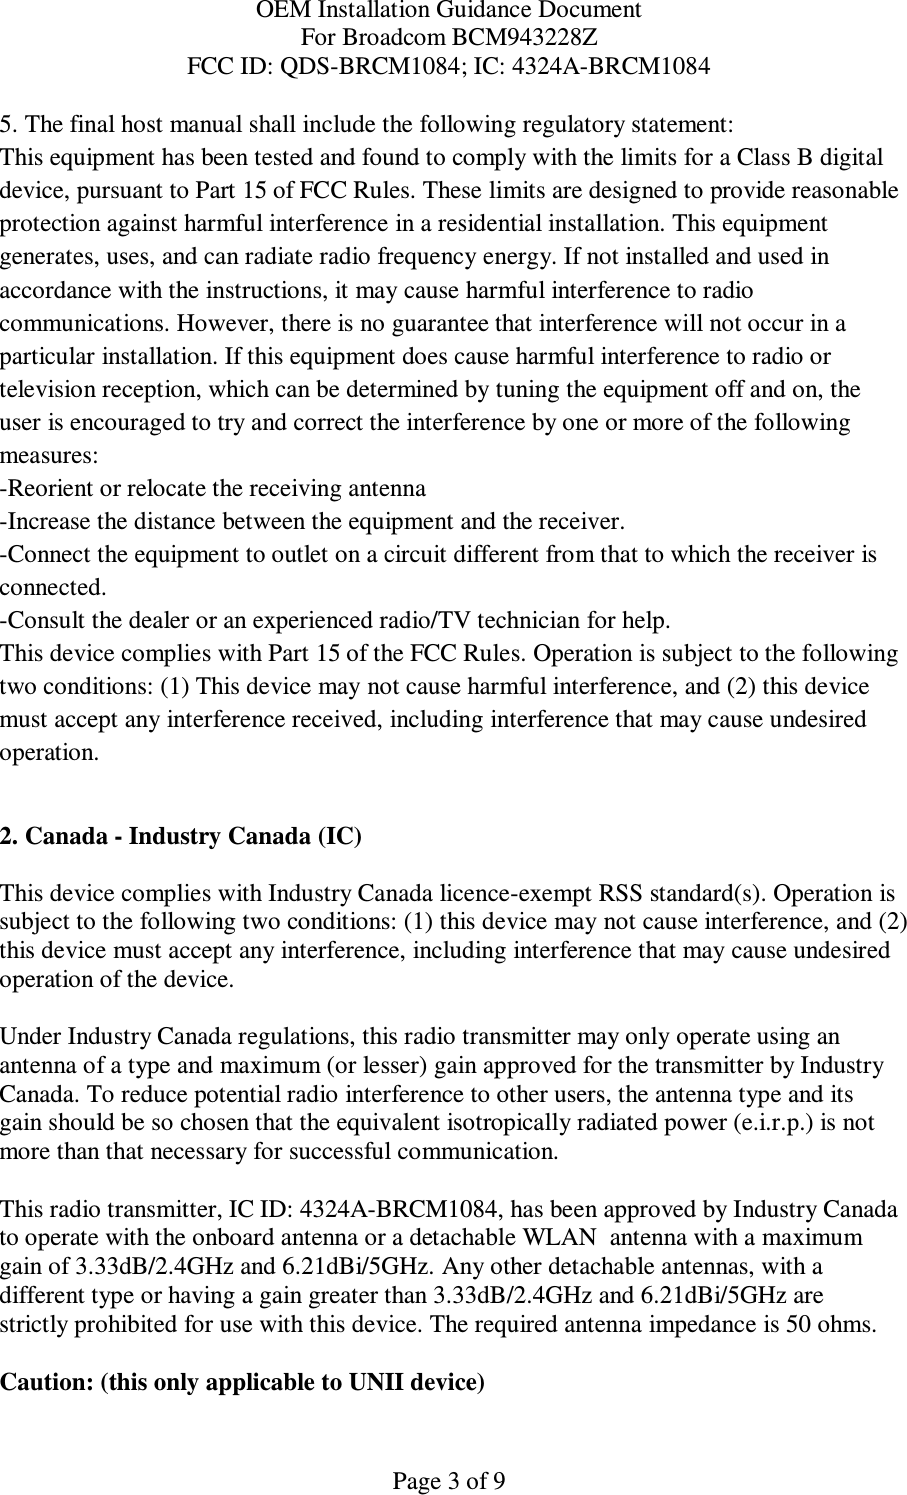 OEM Installation Guidance Document For Broadcom BCM943228Z FCC ID: QDS-BRCM1084; IC: 4324A-BRCM1084  Page 3 of 9 5. The final host manual shall include the following regulatory statement: This equipment has been tested and found to comply with the limits for a Class B digital device, pursuant to Part 15 of FCC Rules. These limits are designed to provide reasonable protection against harmful interference in a residential installation. This equipment generates, uses, and can radiate radio frequency energy. If not installed and used in accordance with the instructions, it may cause harmful interference to radio communications. However, there is no guarantee that interference will not occur in a particular installation. If this equipment does cause harmful interference to radio or television reception, which can be determined by tuning the equipment off and on, the user is encouraged to try and correct the interference by one or more of the following measures: -Reorient or relocate the receiving antenna -Increase the distance between the equipment and the receiver. -Connect the equipment to outlet on a circuit different from that to which the receiver is connected. -Consult the dealer or an experienced radio/TV technician for help. This device complies with Part 15 of the FCC Rules. Operation is subject to the following two conditions: (1) This device may not cause harmful interference, and (2) this device must accept any interference received, including interference that may cause undesired operation.  2. Canada - Industry Canada (IC)  This device complies with Industry Canada licence-exempt RSS standard(s). Operation is subject to the following two conditions: (1) this device may not cause interference, and (2) this device must accept any interference, including interference that may cause undesired operation of the device.  Under Industry Canada regulations, this radio transmitter may only operate using an antenna of a type and maximum (or lesser) gain approved for the transmitter by Industry Canada. To reduce potential radio interference to other users, the antenna type and its gain should be so chosen that the equivalent isotropically radiated power (e.i.r.p.) is not more than that necessary for successful communication.  This radio transmitter, IC ID: 4324A-BRCM1084, has been approved by Industry Canada to operate with the onboard antenna or a detachable WLAN  antenna with a maximum gain of 3.33dB/2.4GHz and 6.21dBi/5GHz. Any other detachable antennas, with a different type or having a gain greater than 3.33dB/2.4GHz and 6.21dBi/5GHz are strictly prohibited for use with this device. The required antenna impedance is 50 ohms.  Caution: (this only applicable to UNII device) 